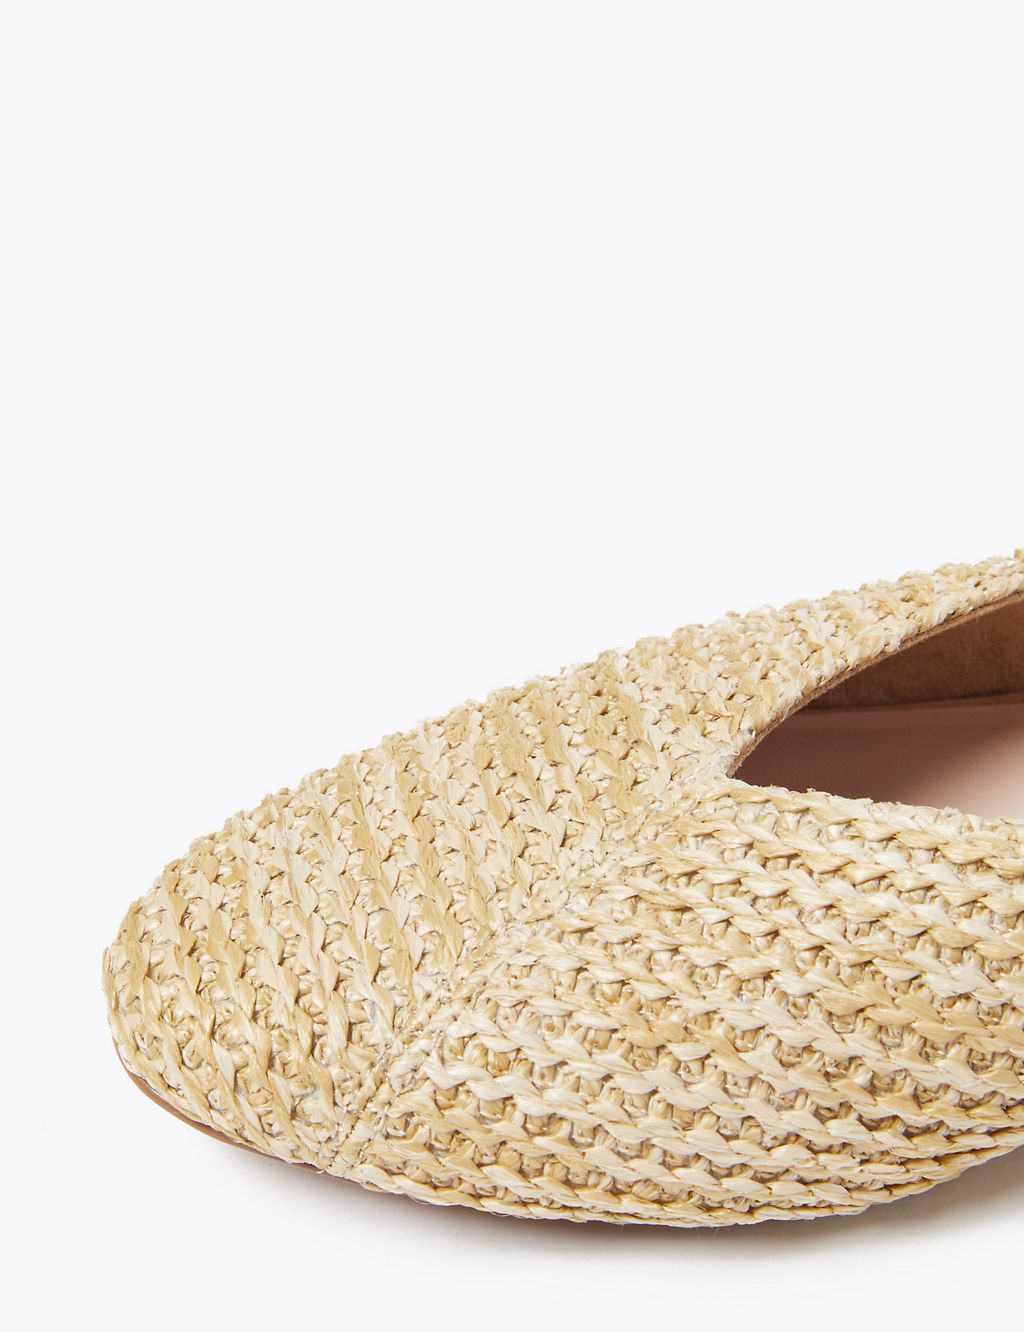 Almond Toe Mules | M&S Collection | M&S